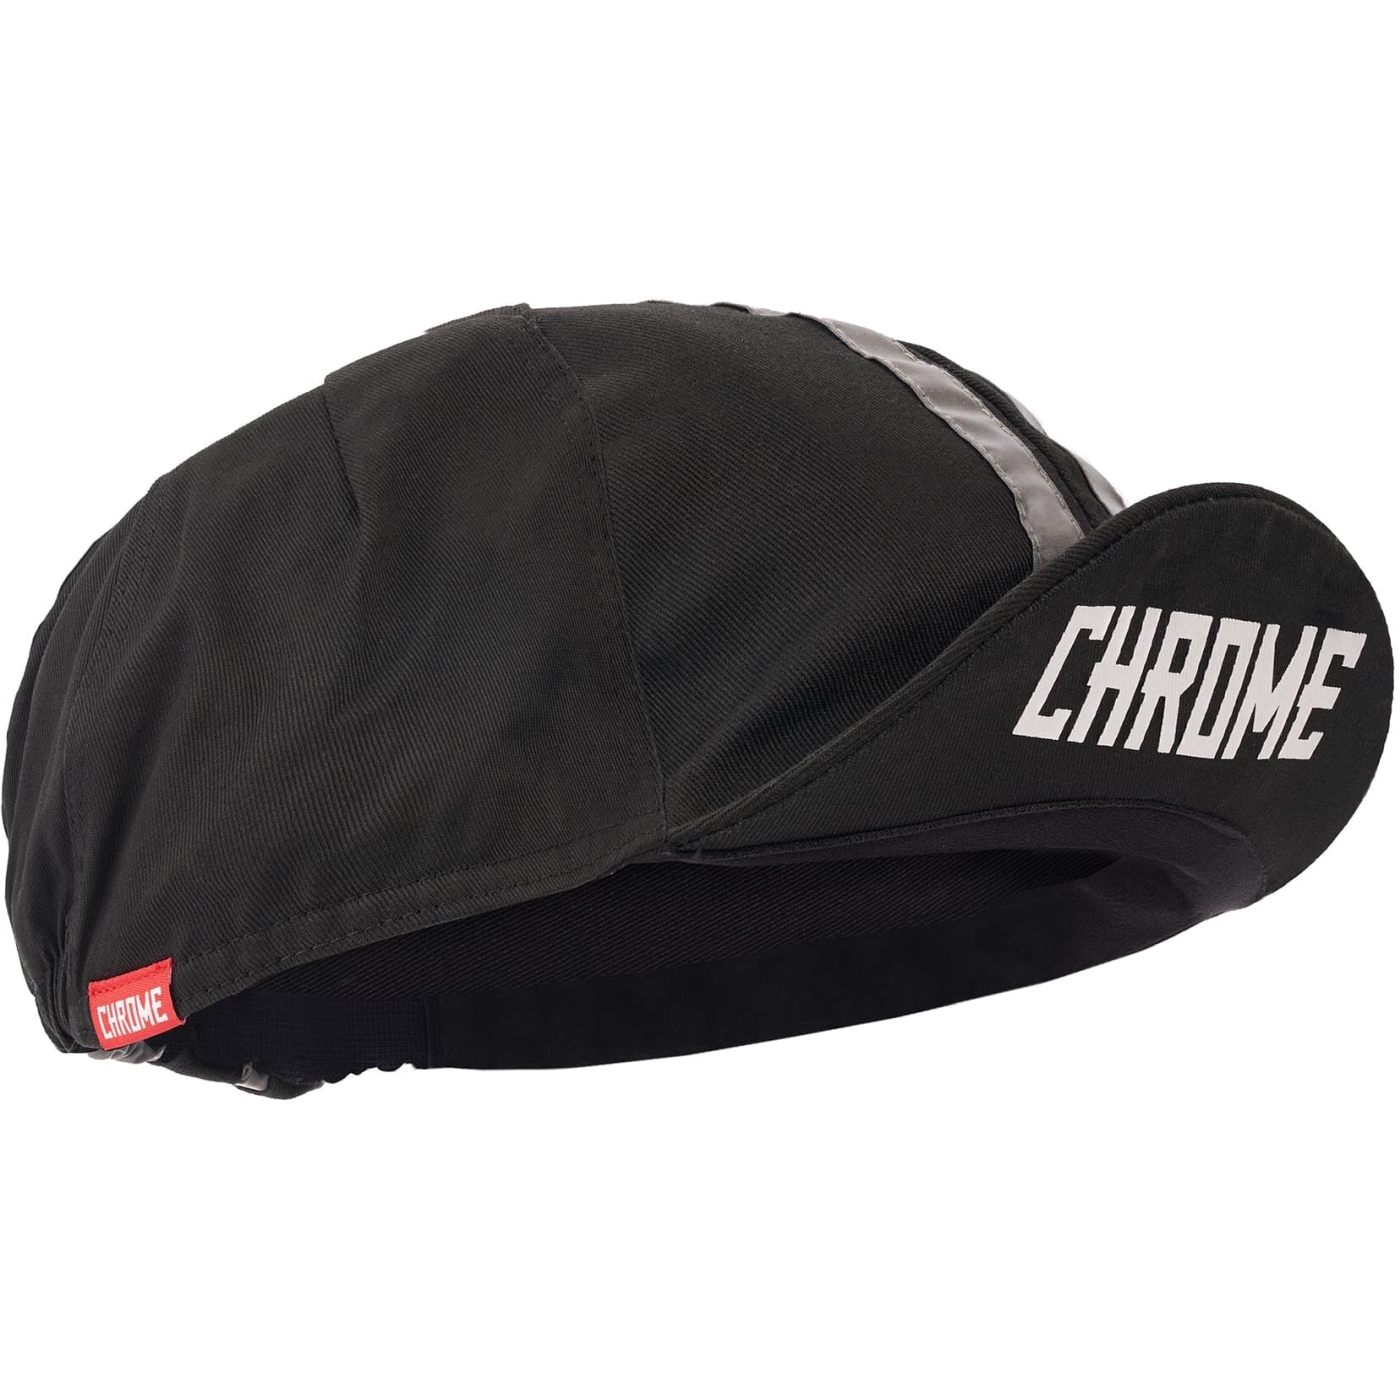 Picture of CHROME Cycling Cap - Black